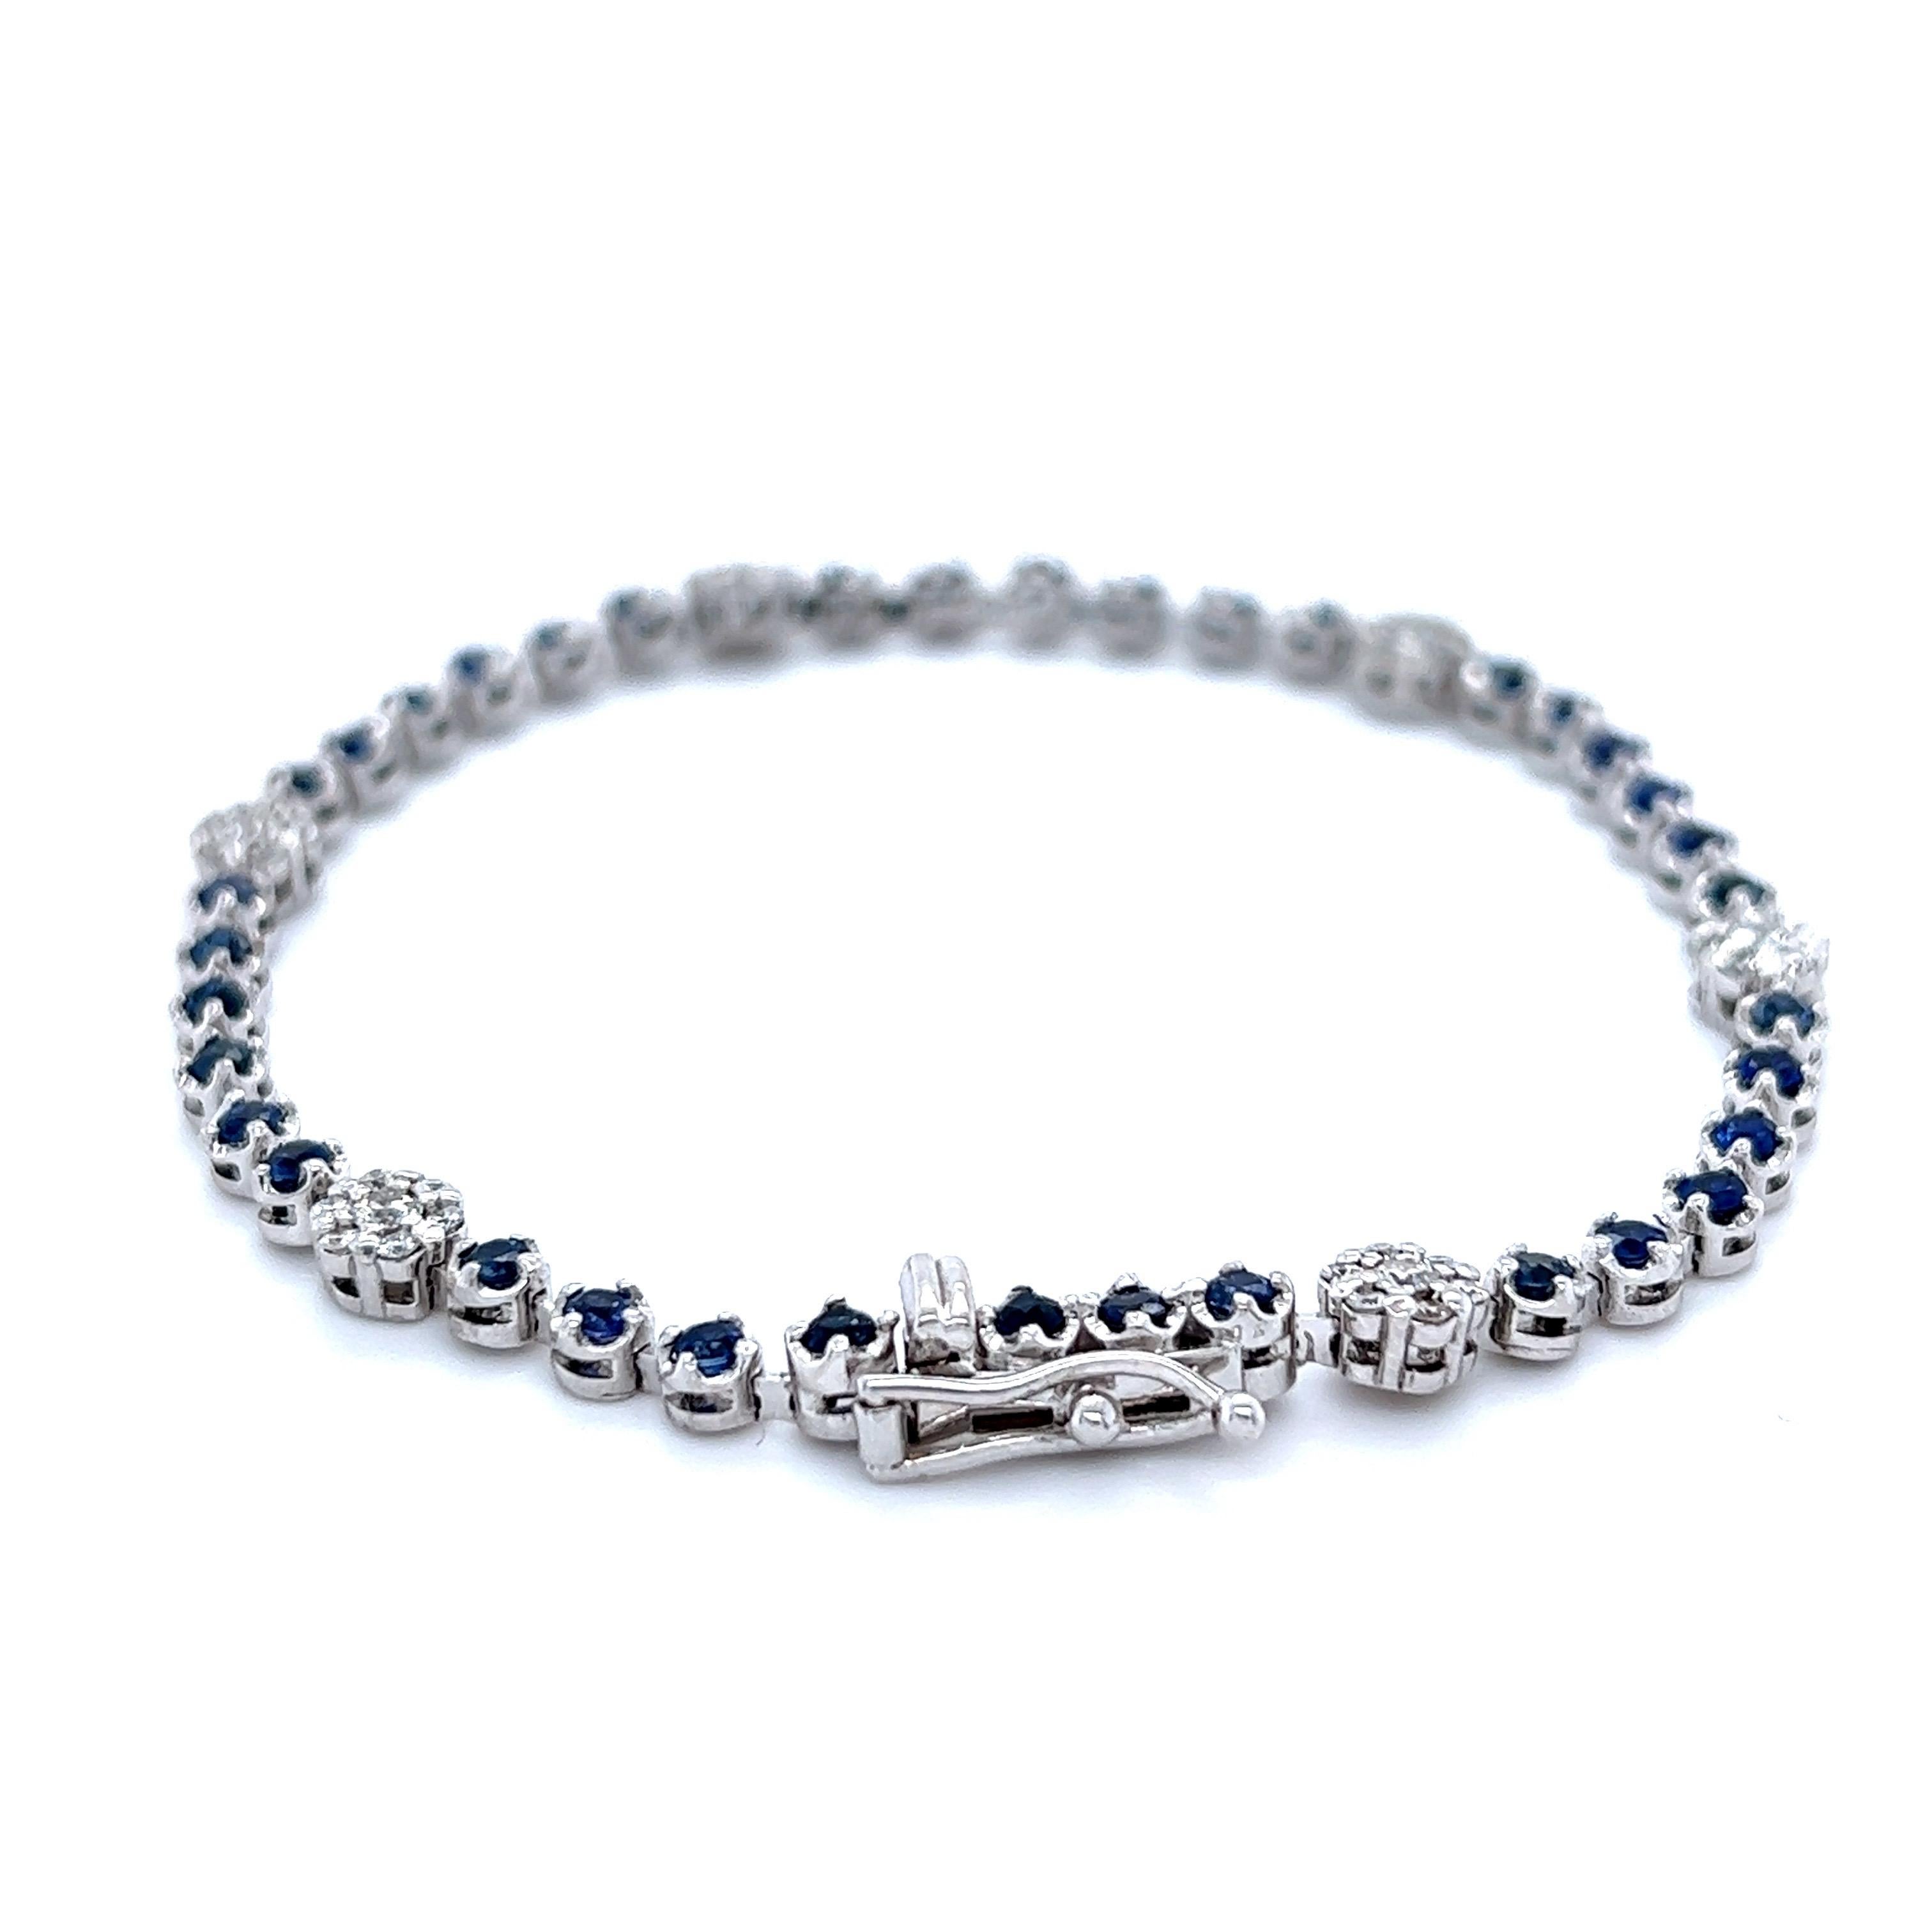 This bracelet has 37 Round Cut Blue Sapphires that weigh 1.84 carats and 42 Round Cut White Diamonds that weigh 0.61 carats. The total carat weight of the bracelet is 2.45 carats. 

It is set in 14 Karat White Gold and has an approximate gold gram